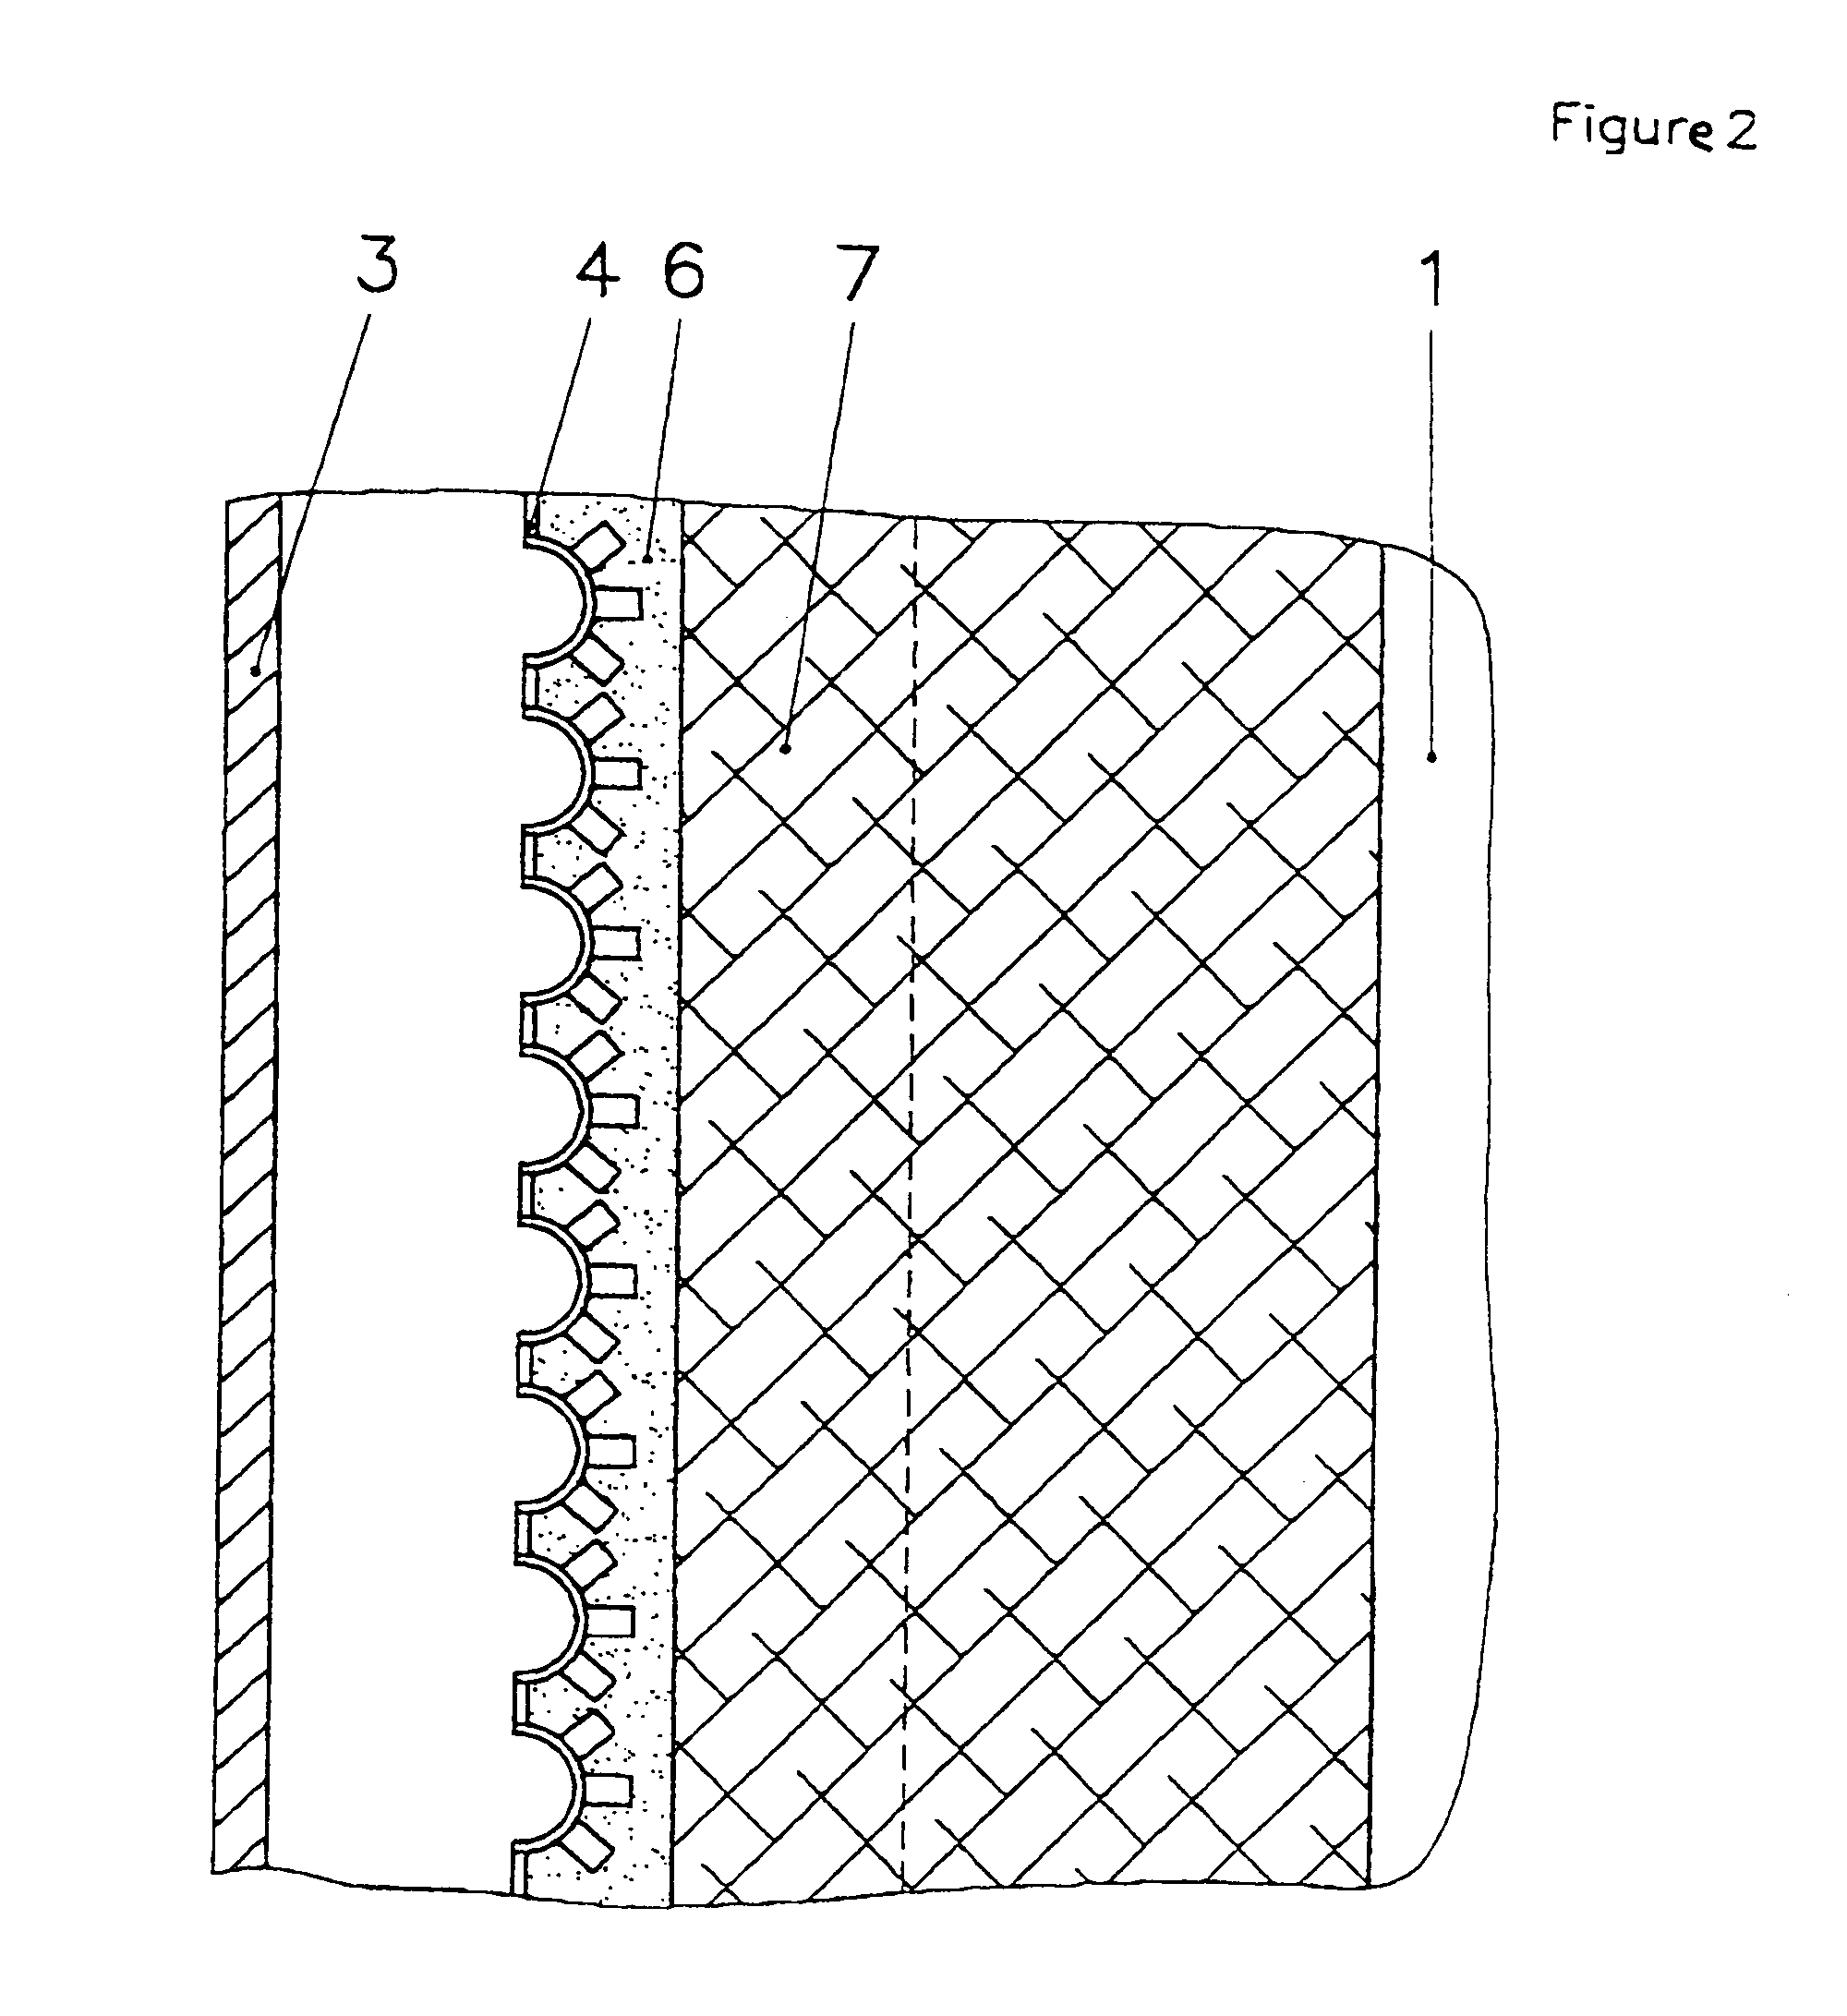 Device for gasifying combustible materials, residues and waste materials containing carbon